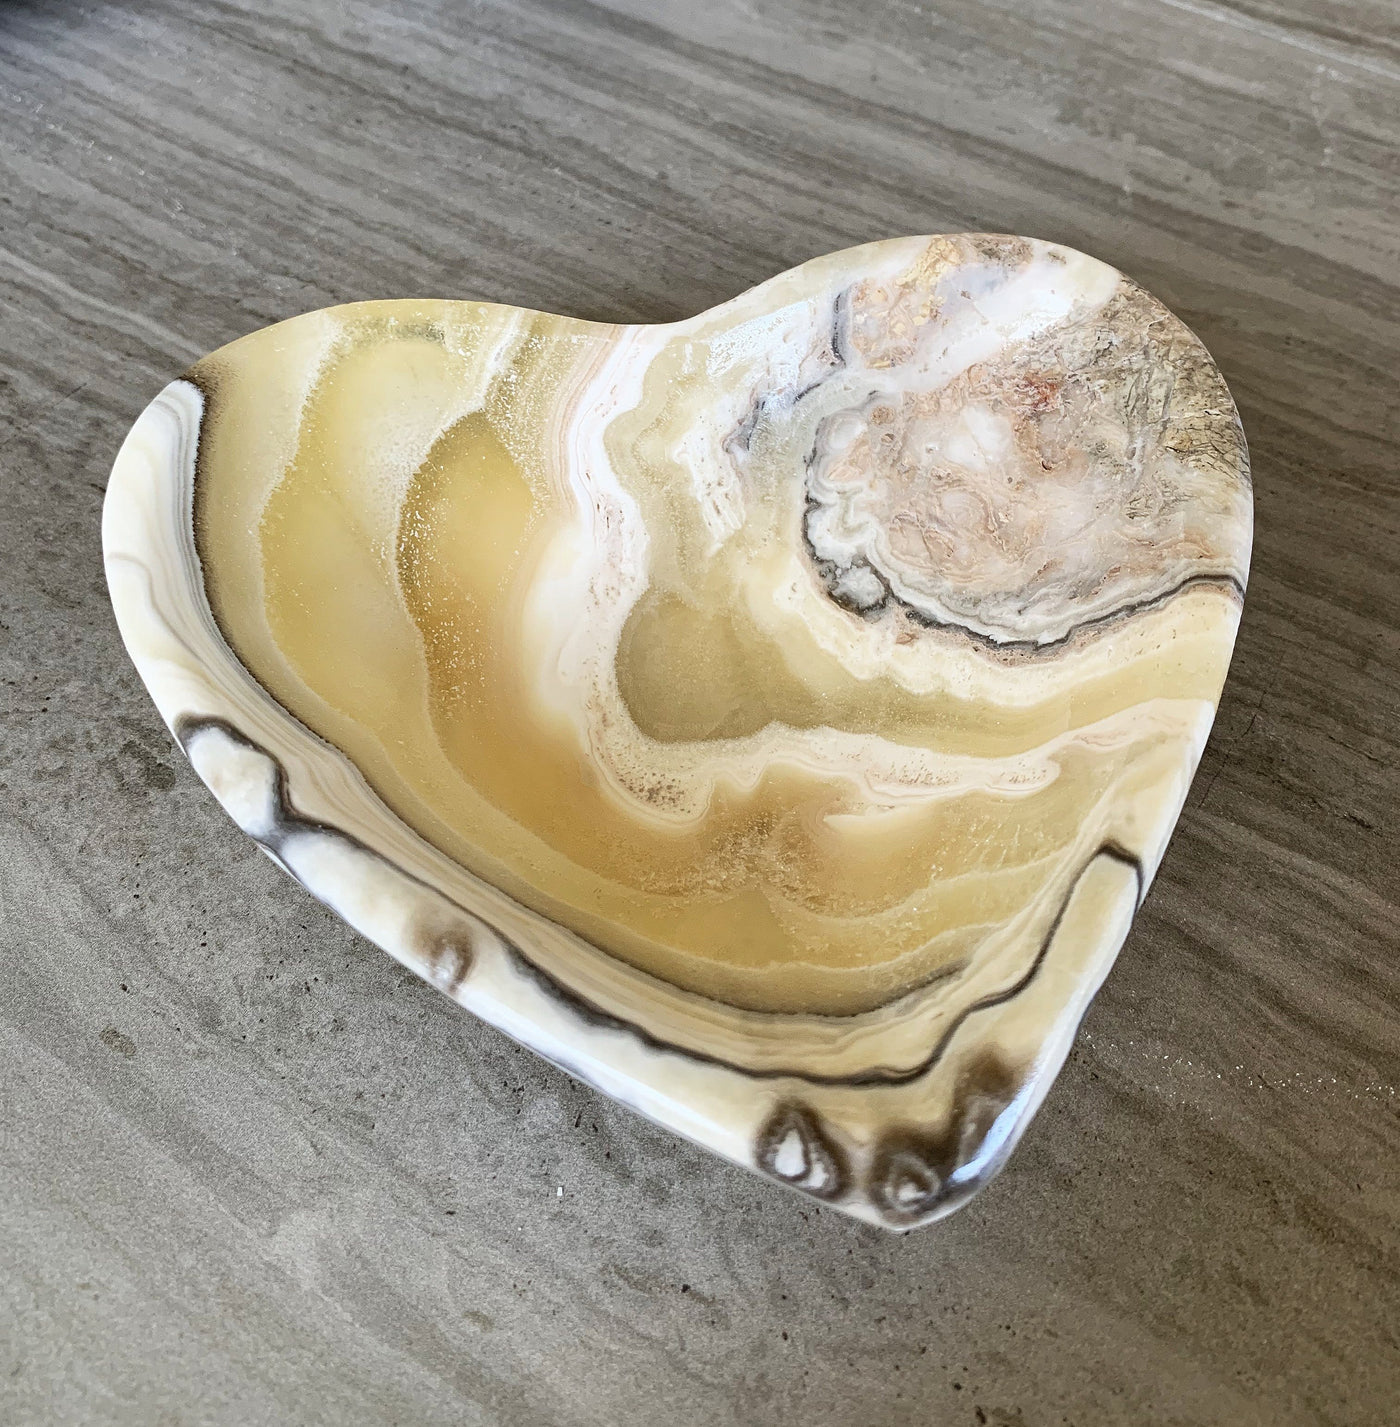 mexican onyx bowl in shades of yellow, white, cream, tan and black on a wood background.